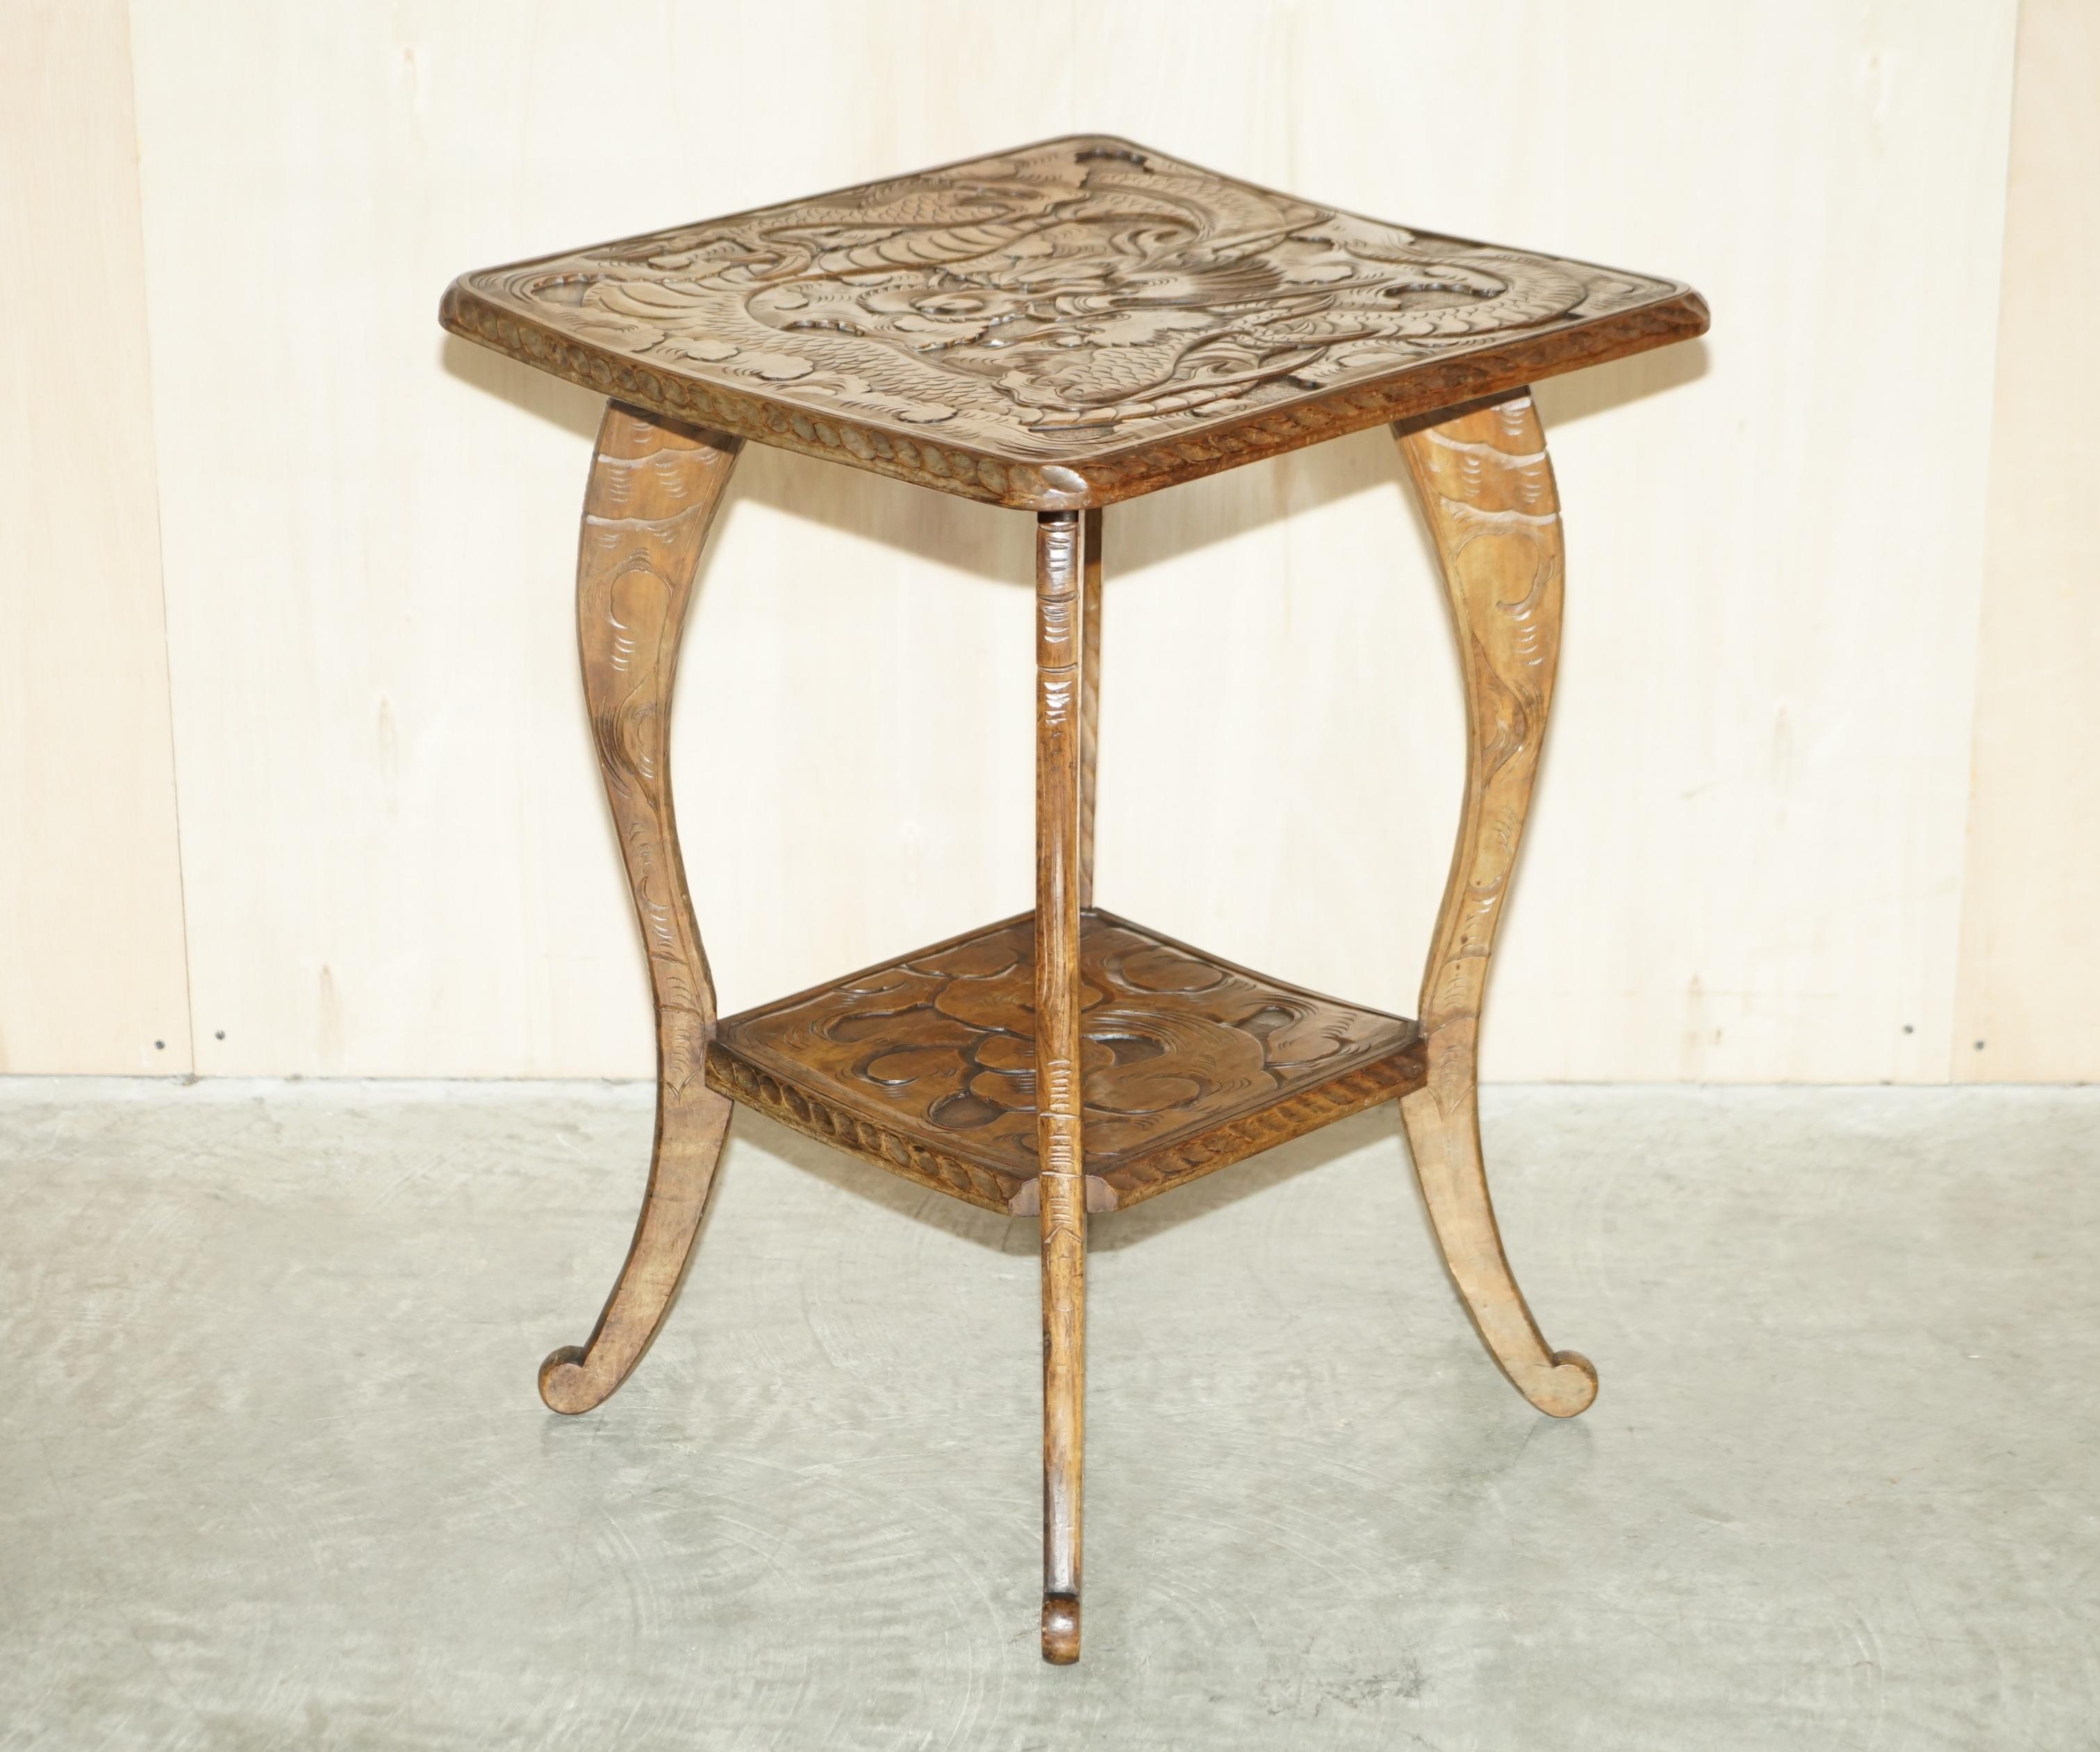 Royal House Antiques

Royal House Antiques is delighted to offer for sale this lovely Liberty’s London 1905 oriental hand carved Dragon mahogany side table.

Please note the delivery fee listed is just a guide, it covers within the M25 only for the